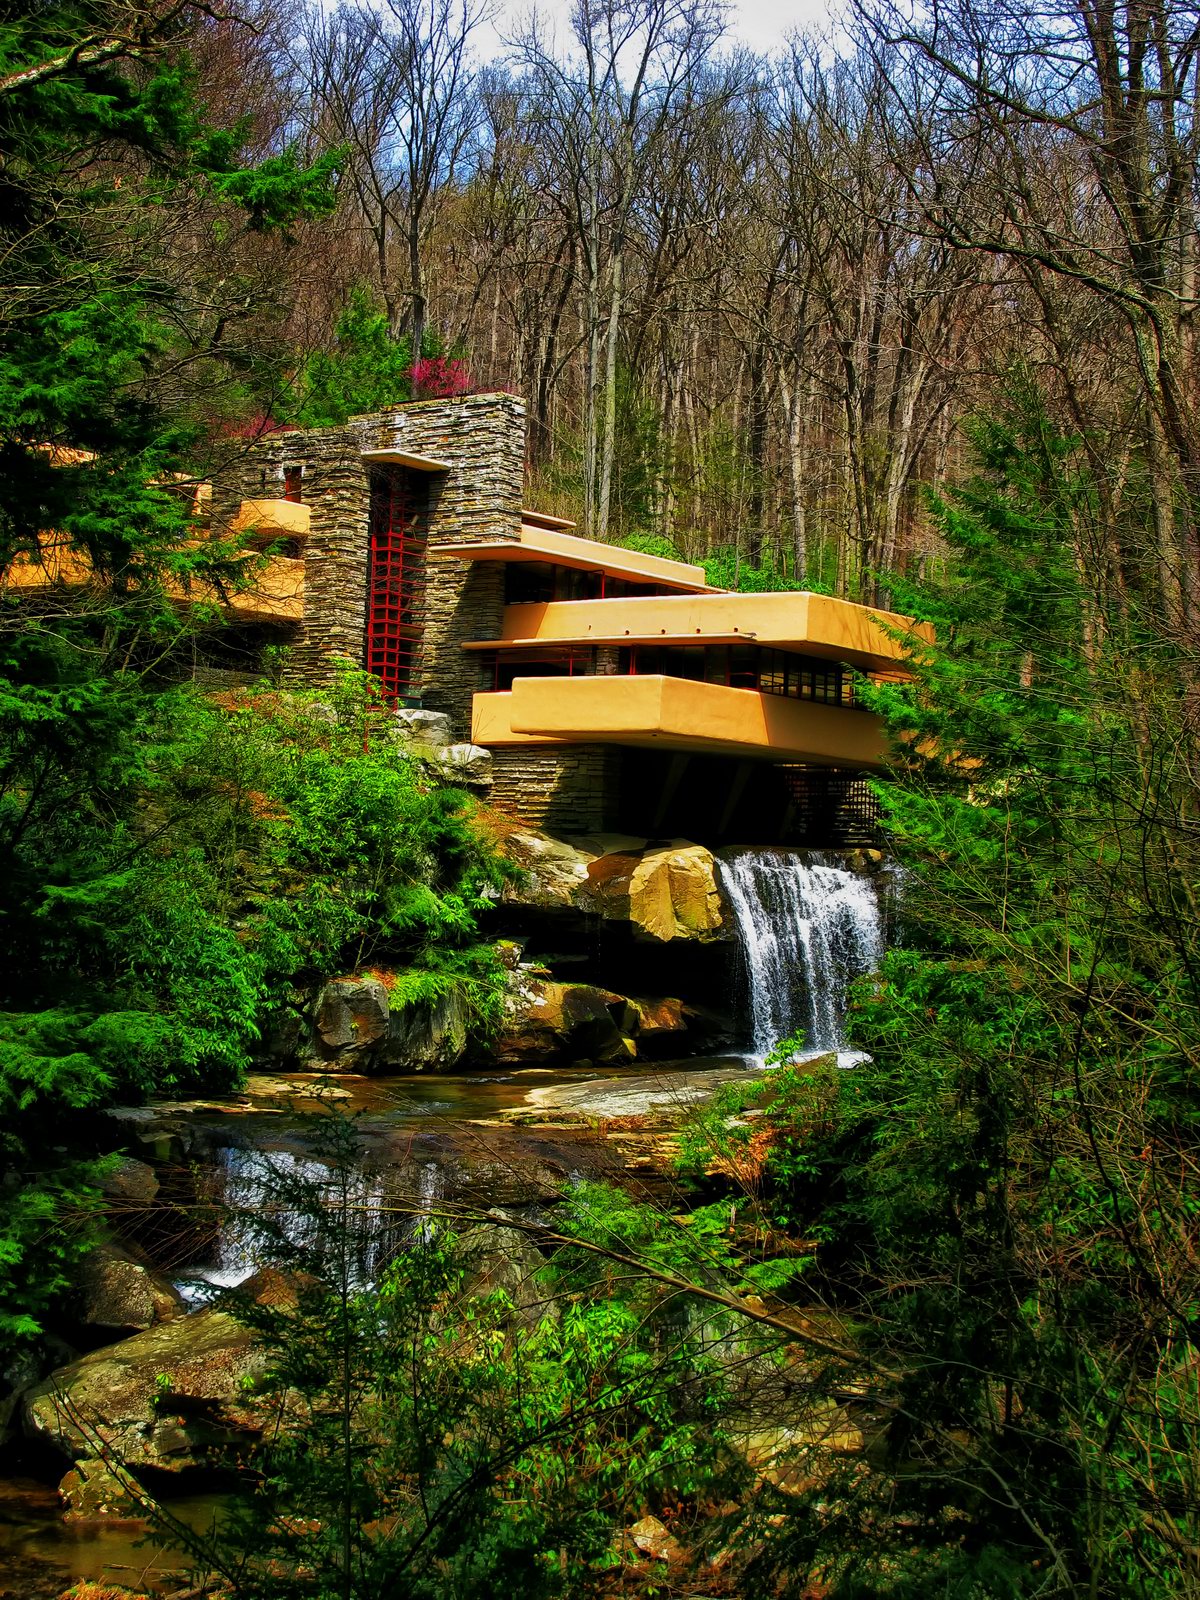 A place in the Laurel Highlands where nature and man blend in harmony.